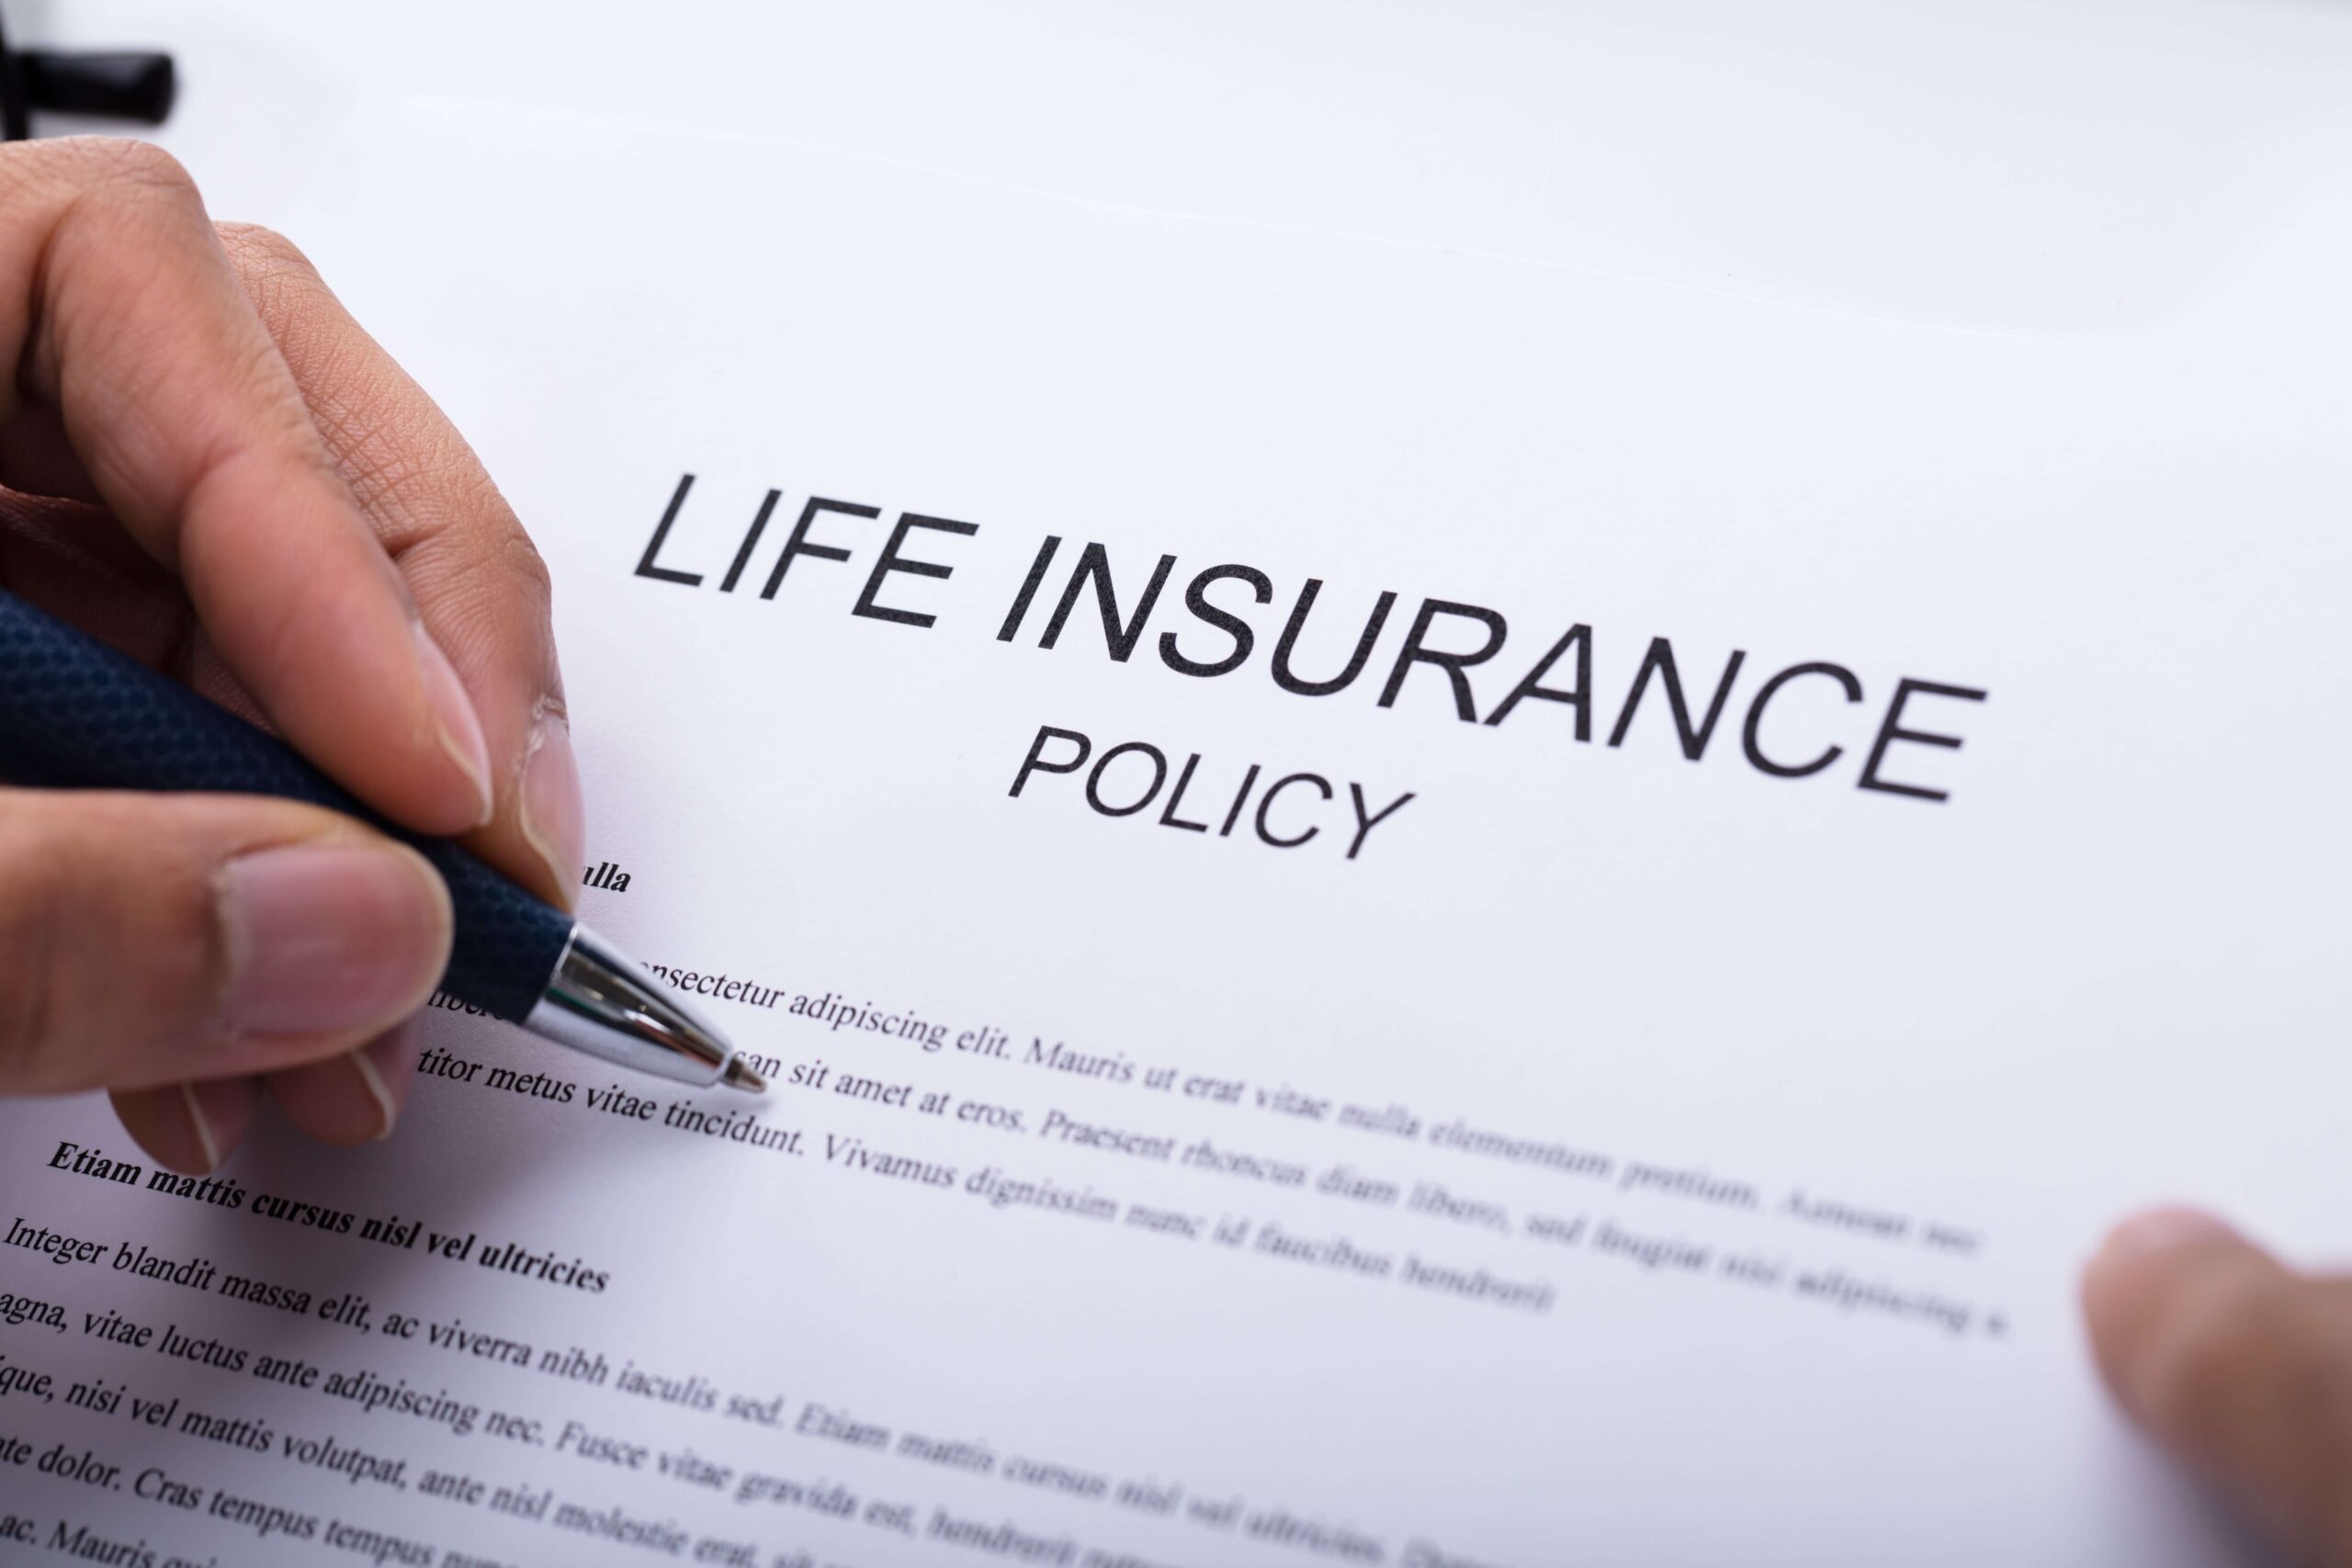 ADHD who successfully purchased a life insurance policy